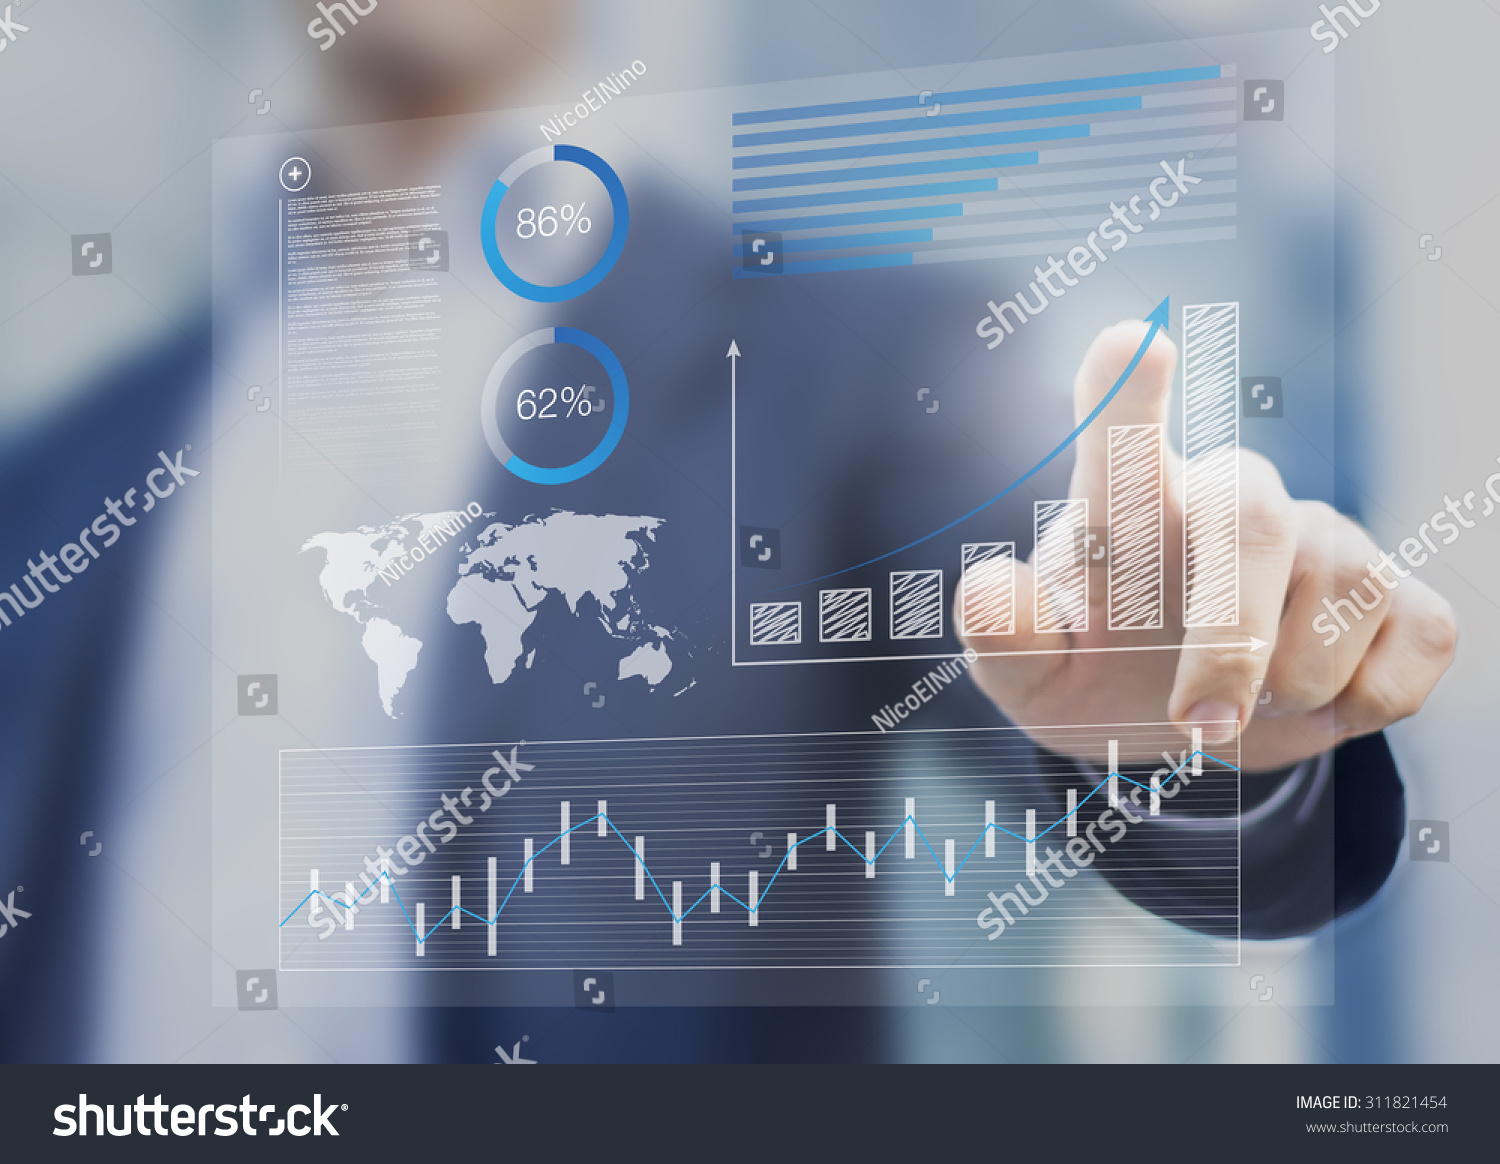 Businessman touching financial dashboard with key performance indicators #311821454